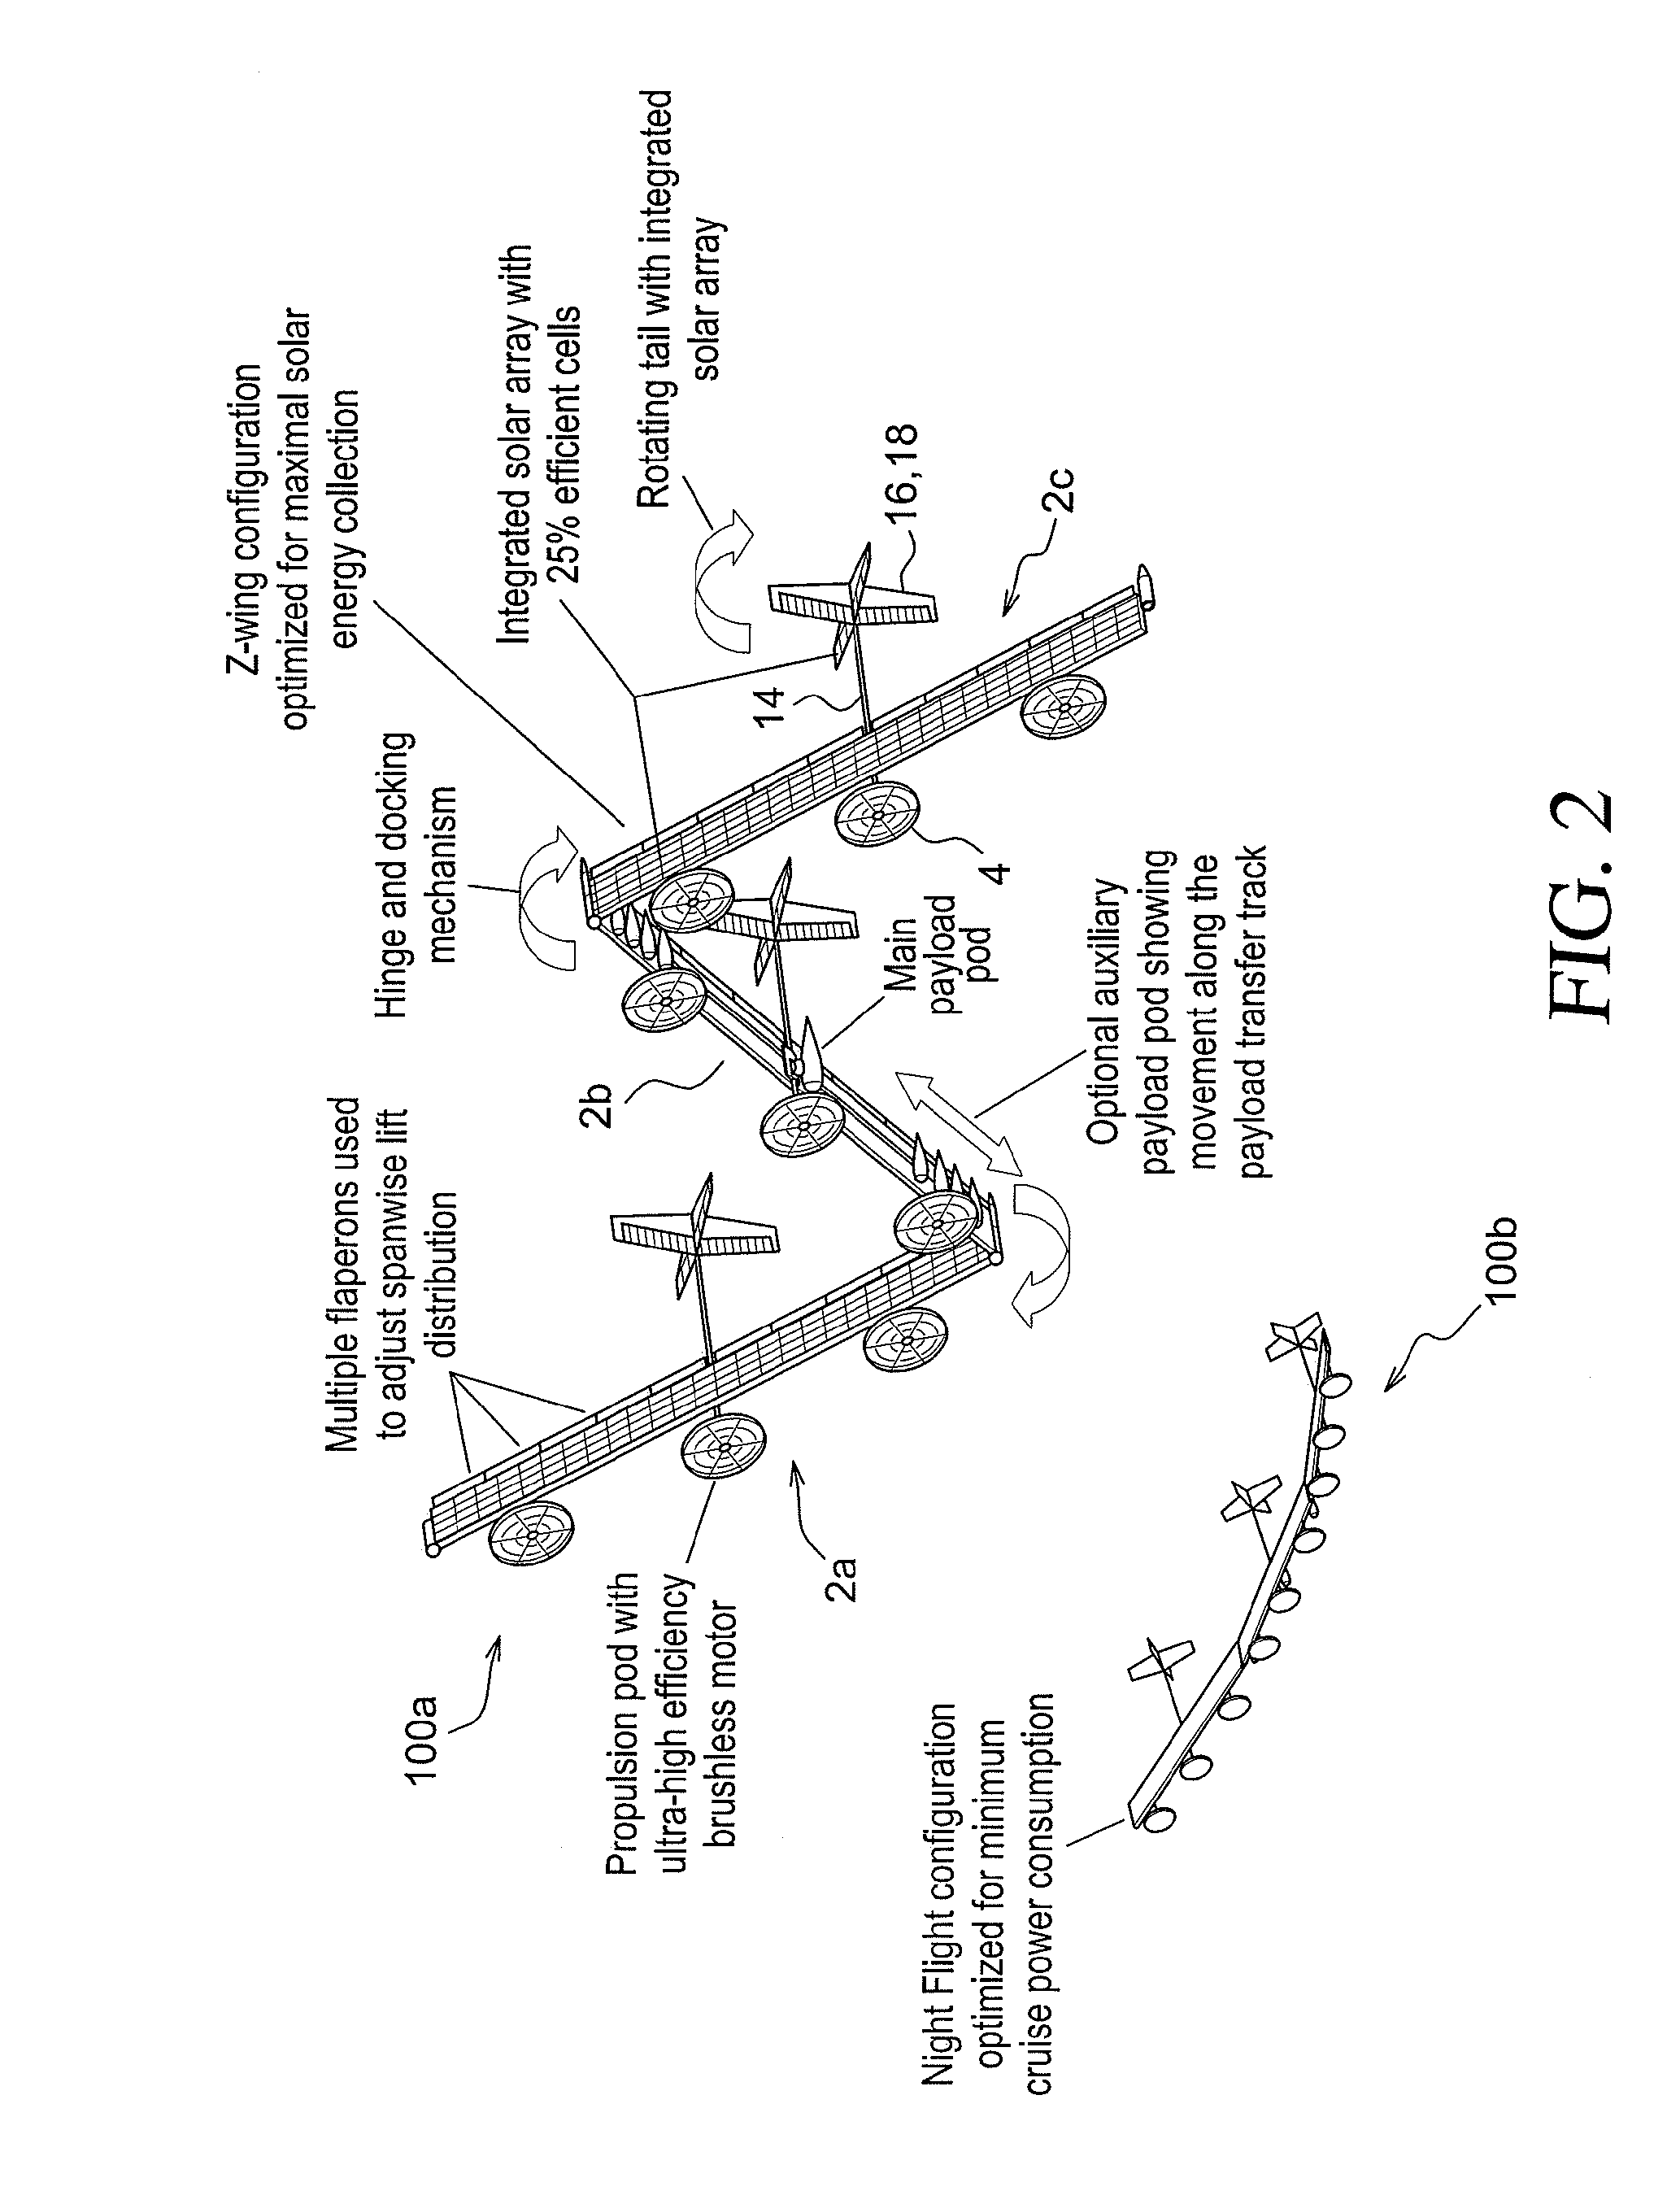 Adaptive tail assembly for solar aircraft